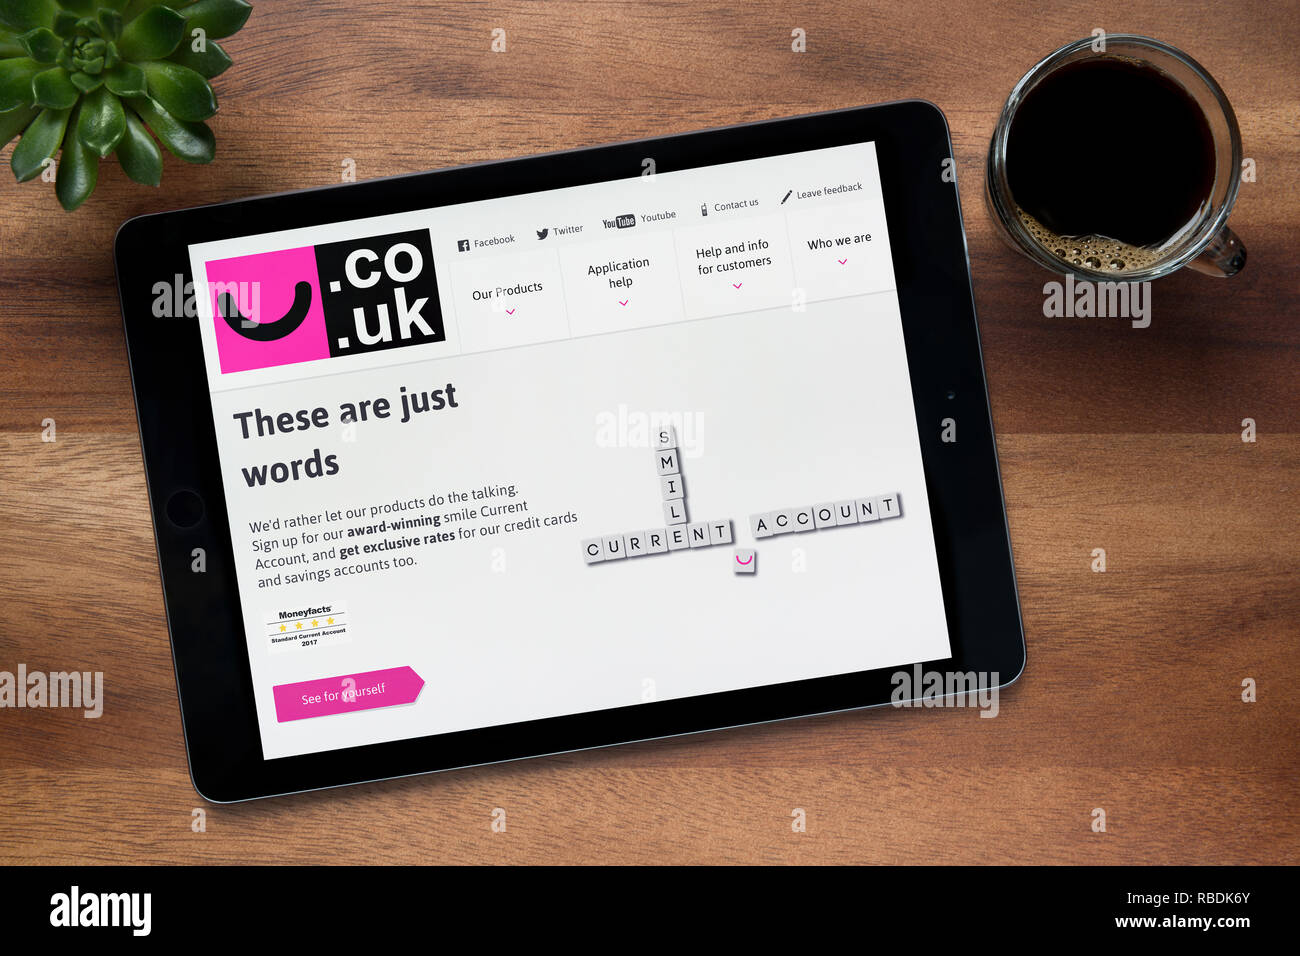 The website of Smile bank is seen on an iPad tablet, on a wooden table along with an espresso coffee and a house plant (Editorial use only). Stock Photo